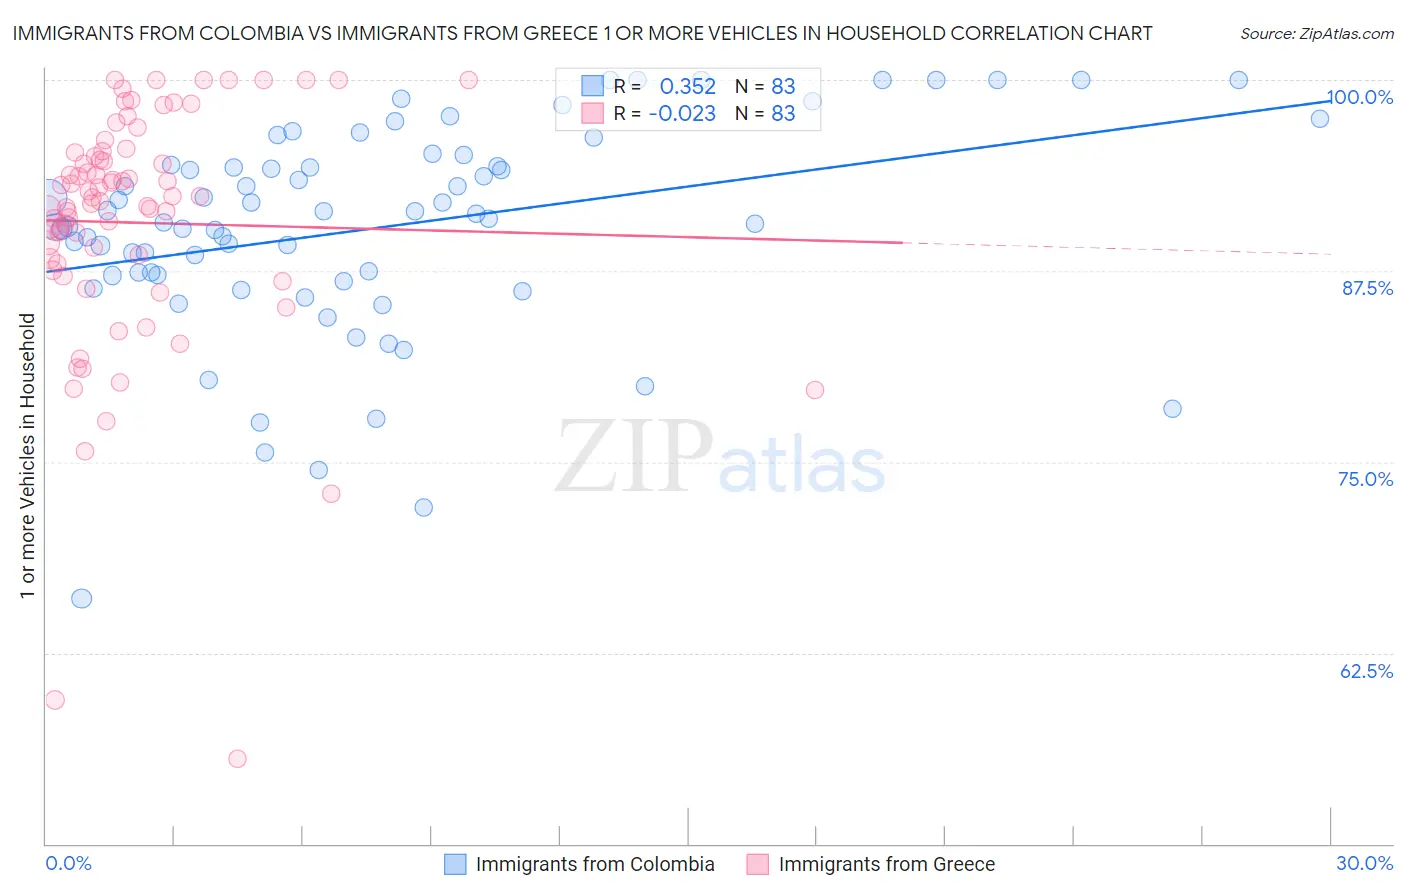 Immigrants from Colombia vs Immigrants from Greece 1 or more Vehicles in Household